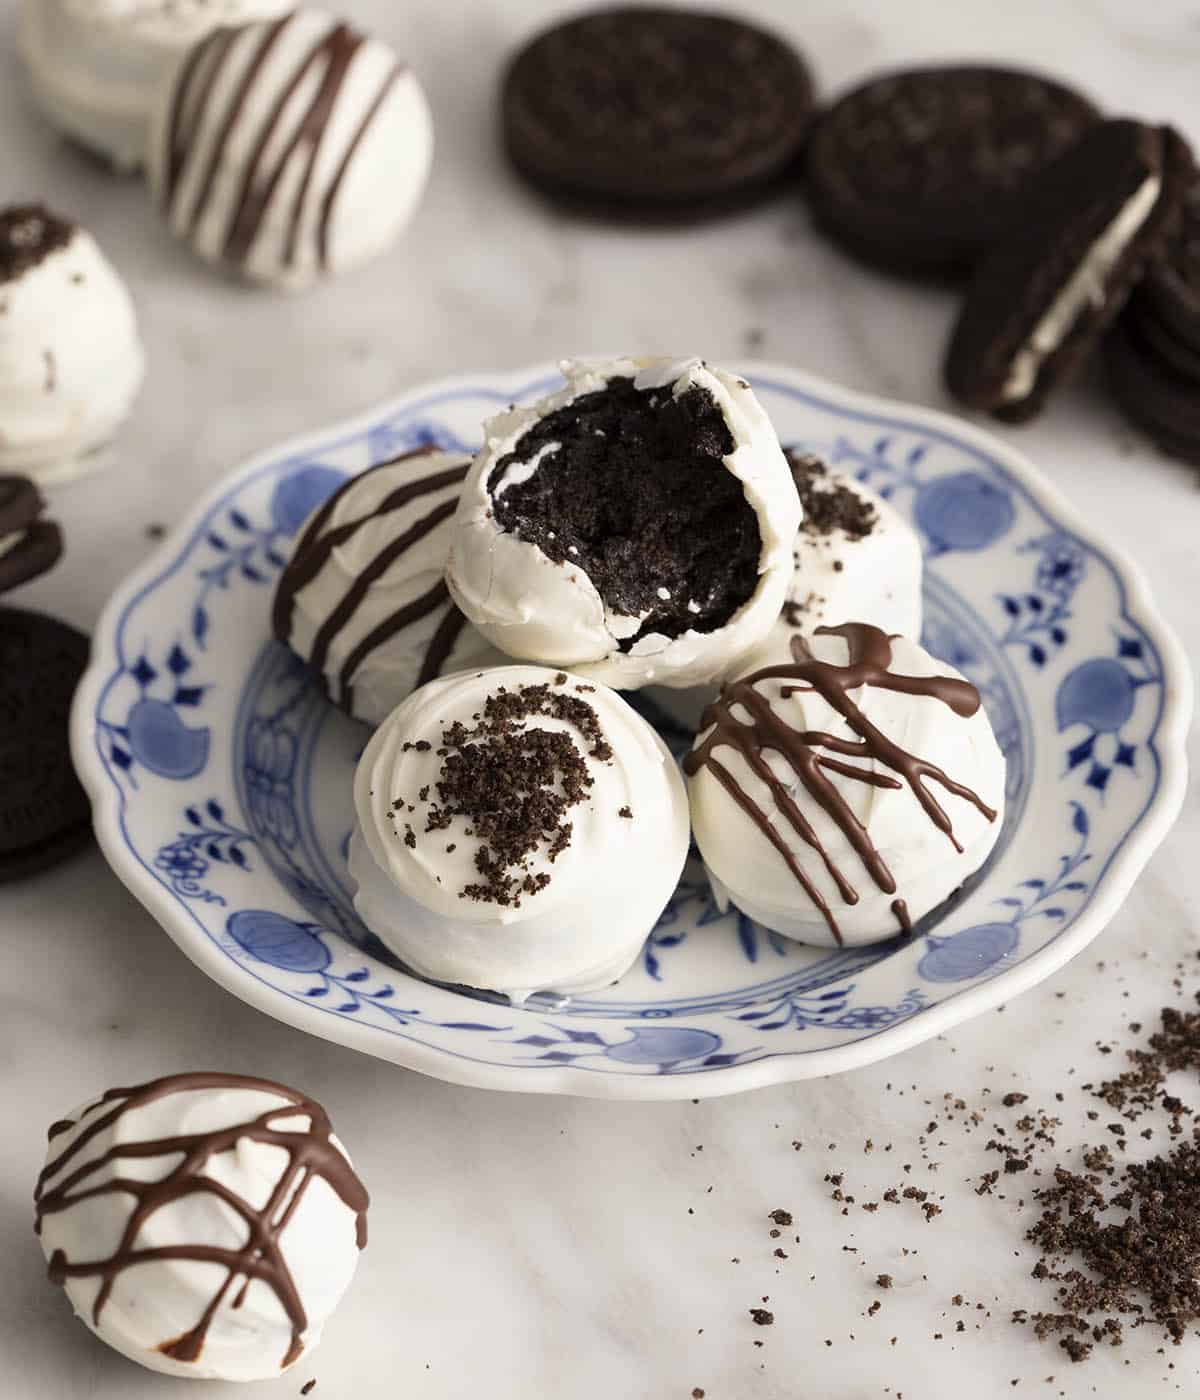 Oreo balls stacked on a blue and white plate. Oreos and balls scattered around.